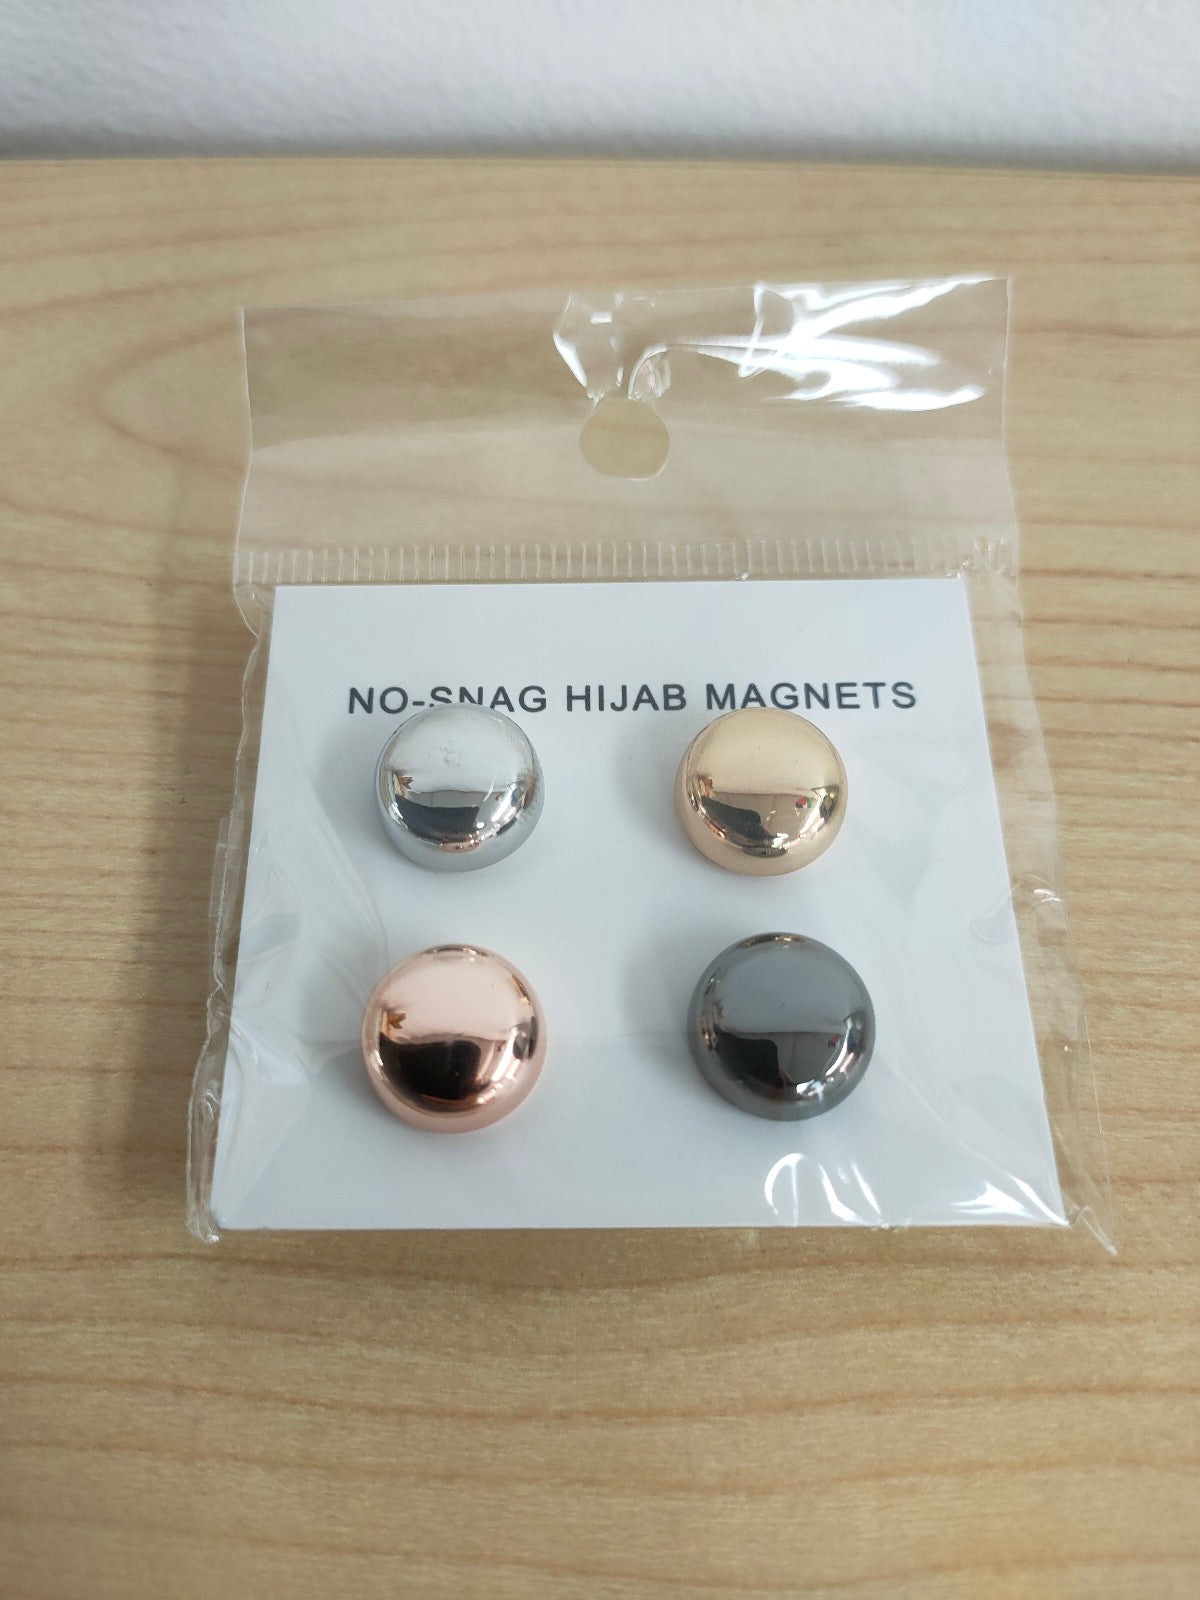 Discover our Golden Range 4 Pack Hijab Magnets at Hikmah Boutique. Keep your hijab secure all day with premium-quality magnets. Shop now For Hijab accessories!